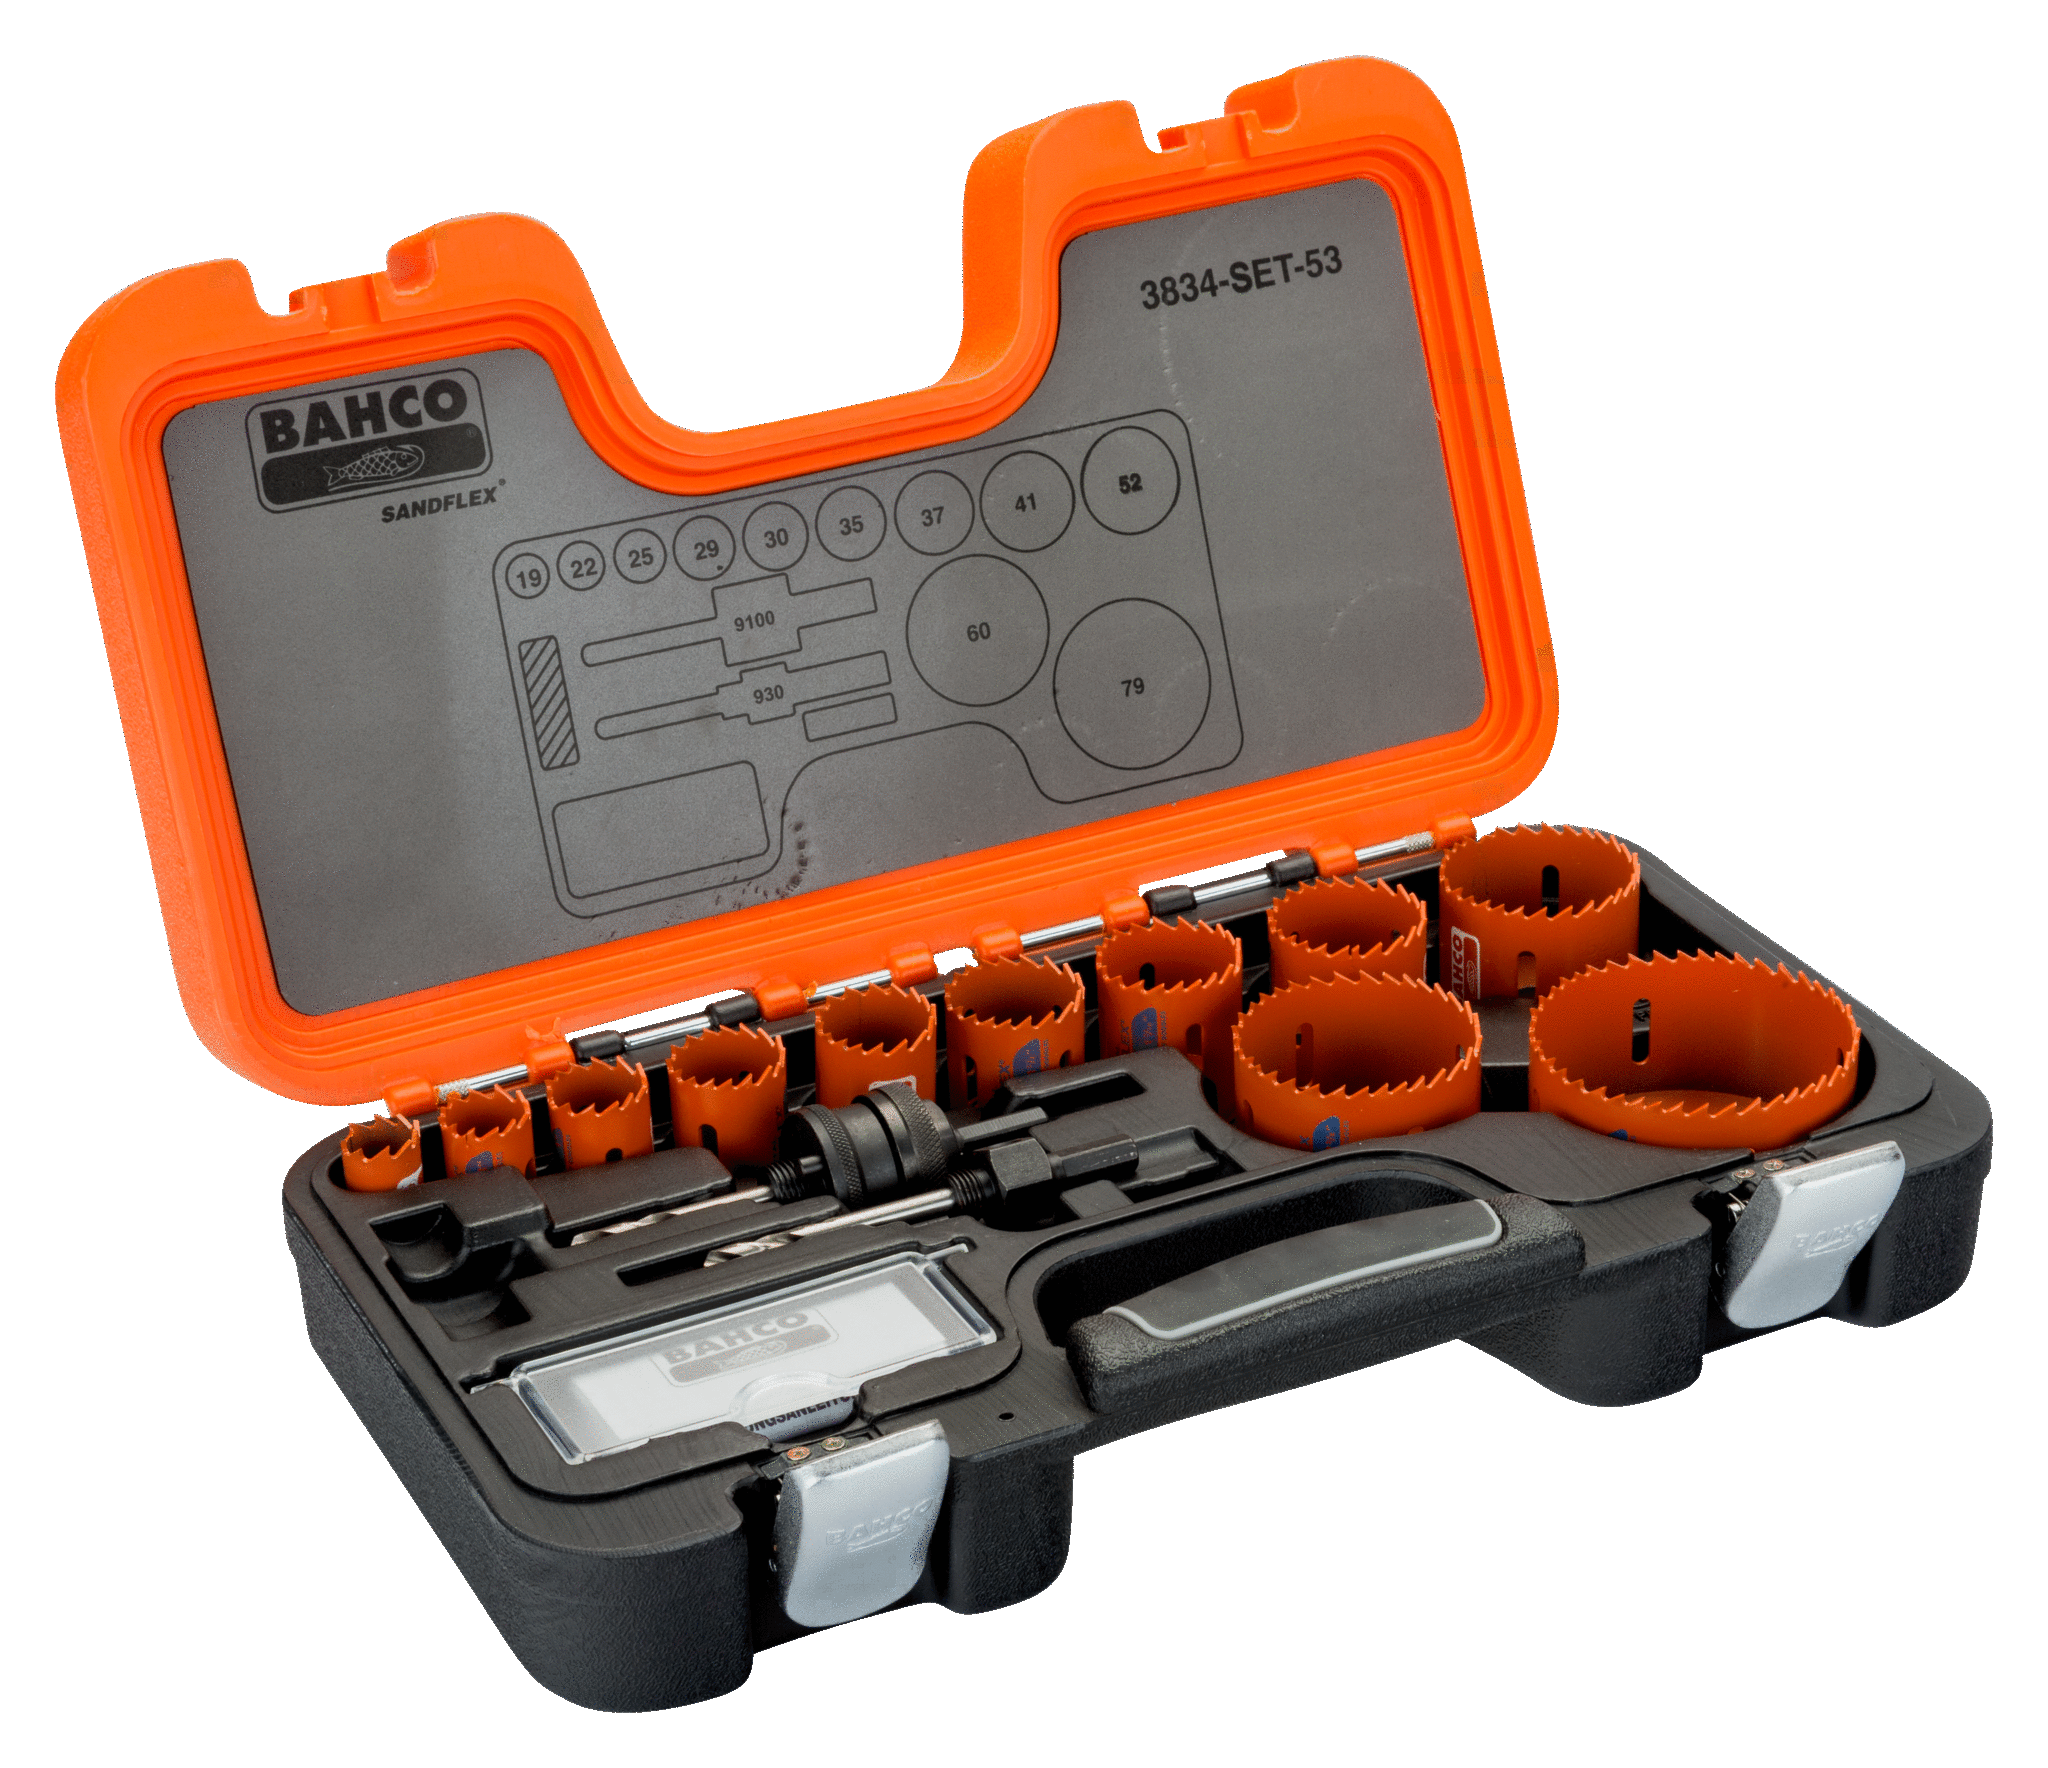 Meterk 17 Pcs Hole Saw Kit with 13Pcs Saw Blades Details about   Hole Saw Set 2 Mandrels 1 In 